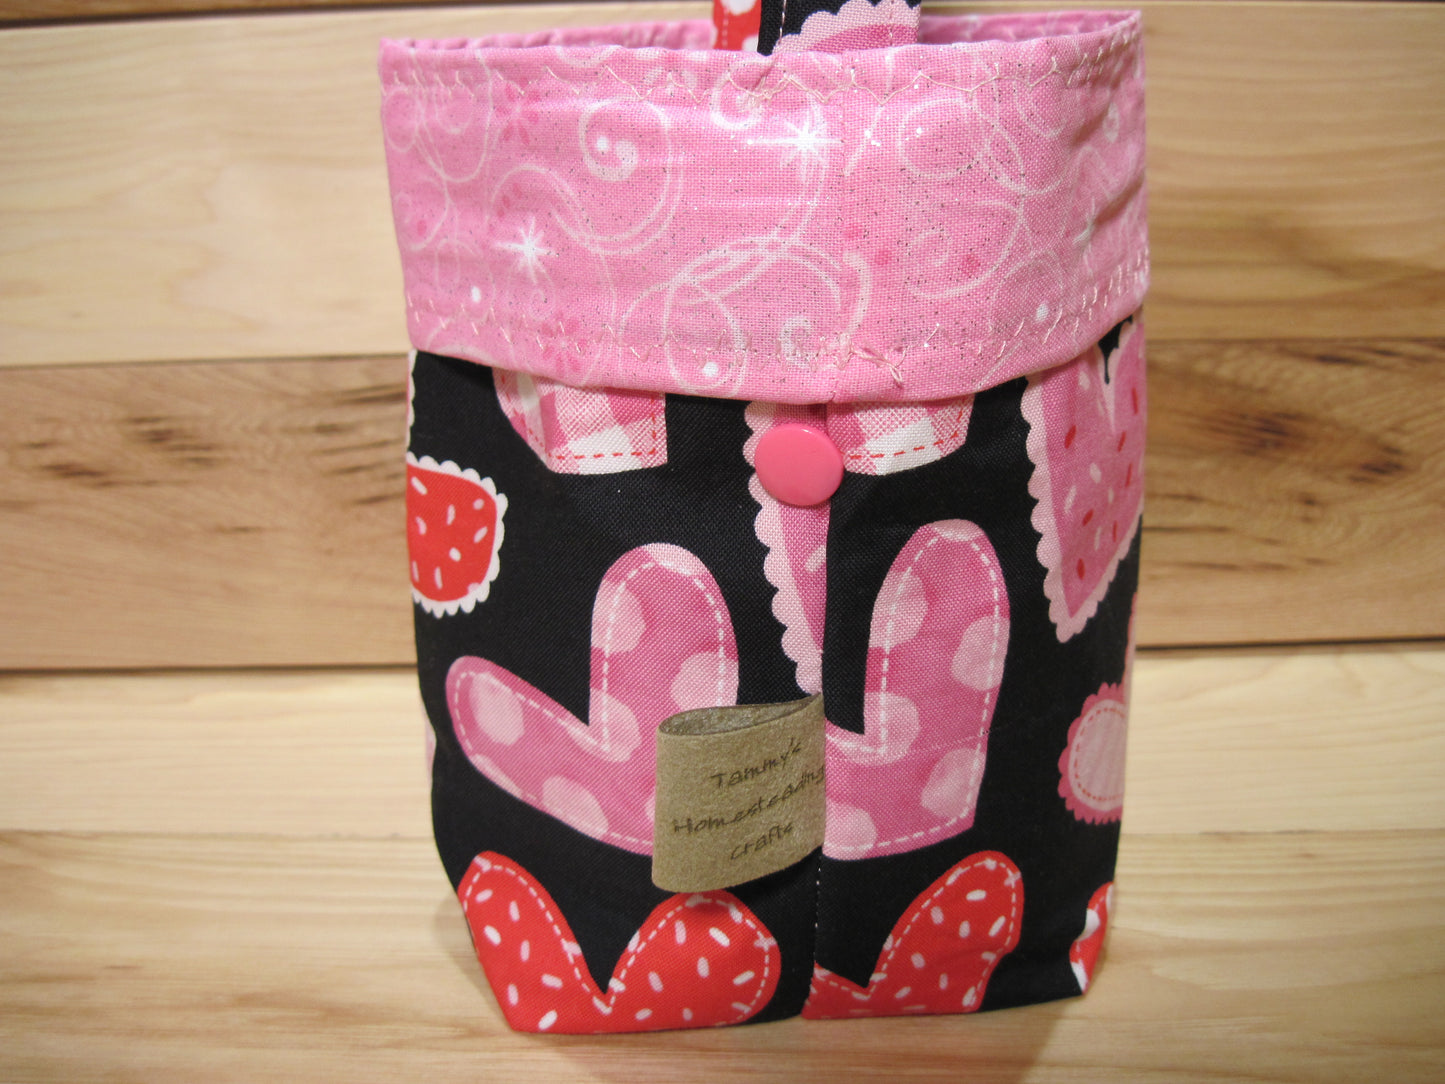 Wrist-Yarn Bag Valentine's Day Hearts w/ pink, removable snap handles, magnet closure